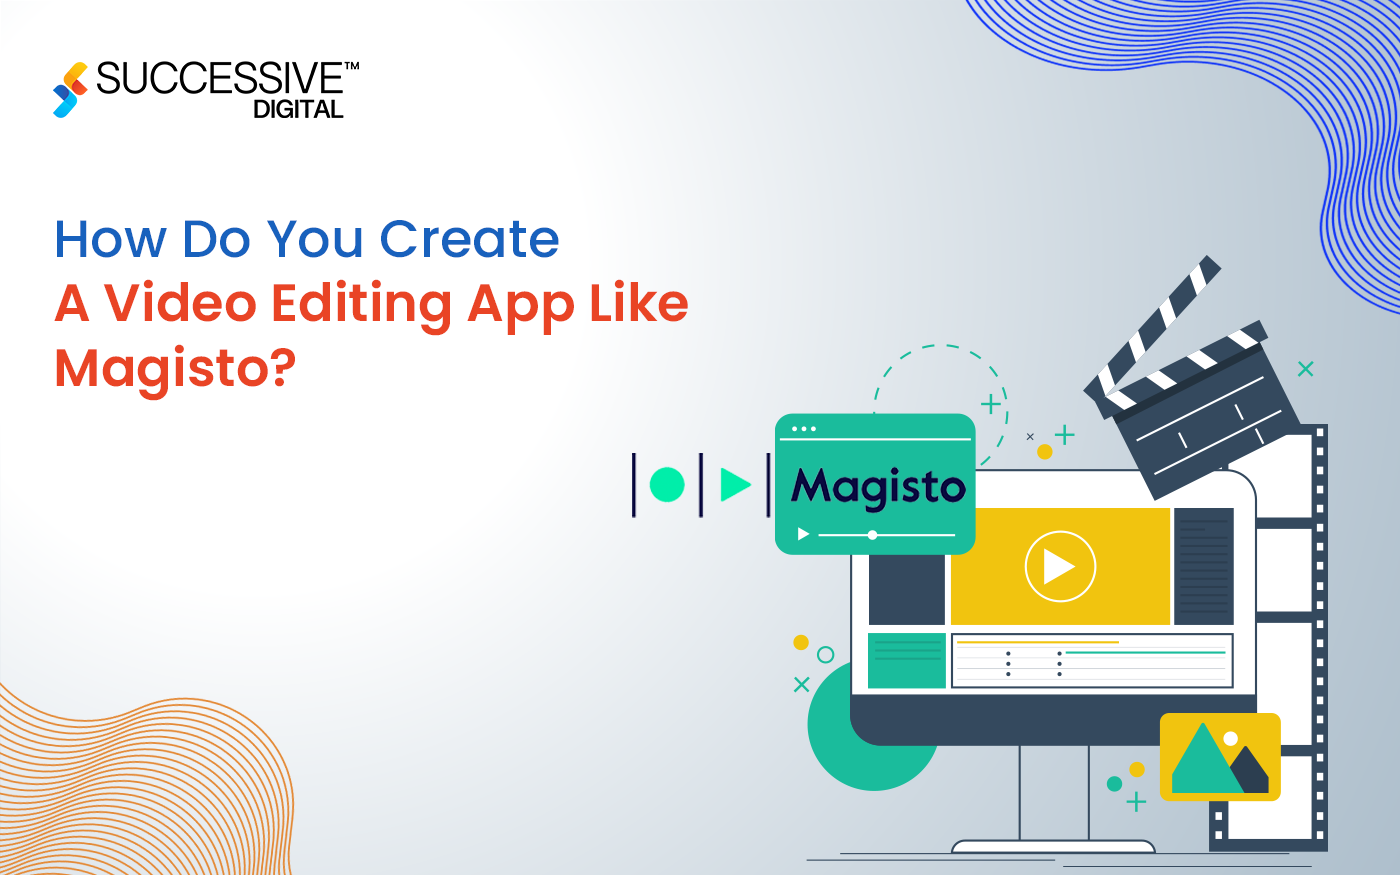 How To Develop A Video Editing App Like Magisto?